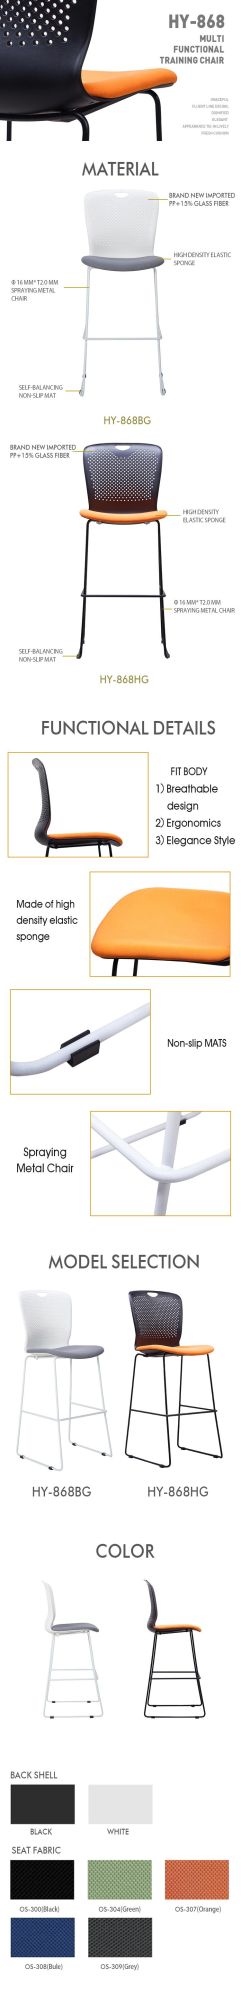 Metal High Leg Sled Base Bar Chair for Dining Room and Leisure Occasion